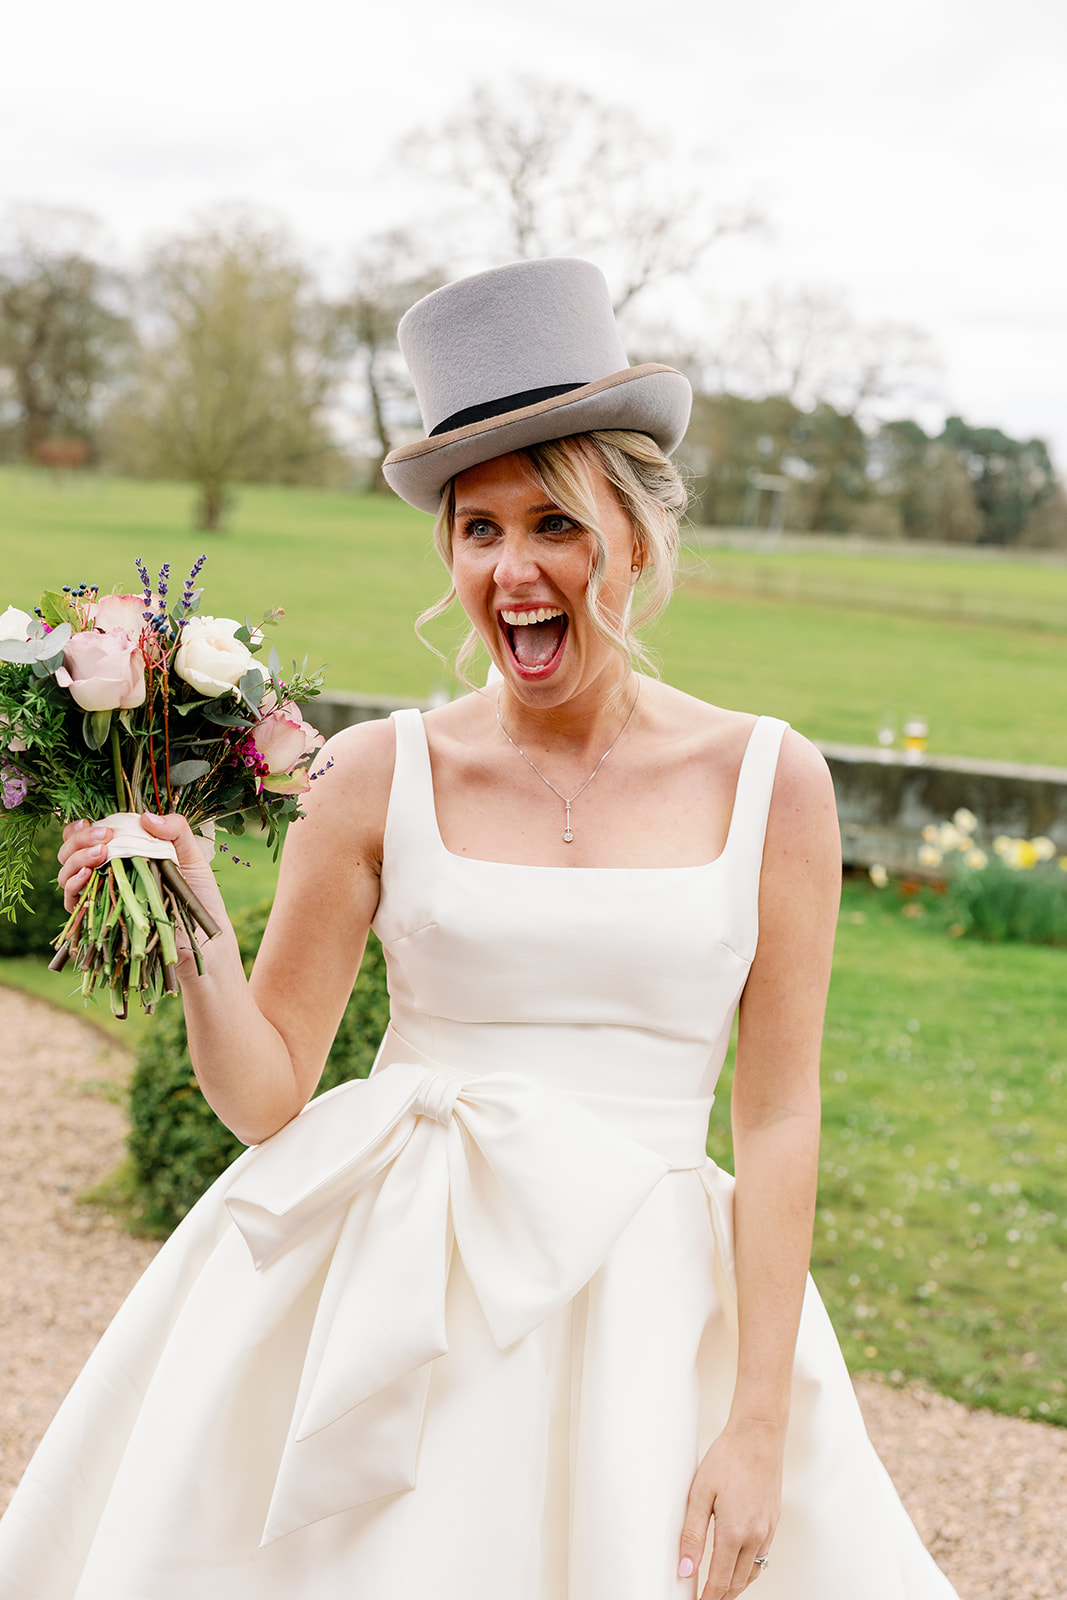 a silly wedding photo of a bride wearing the grooms top hat